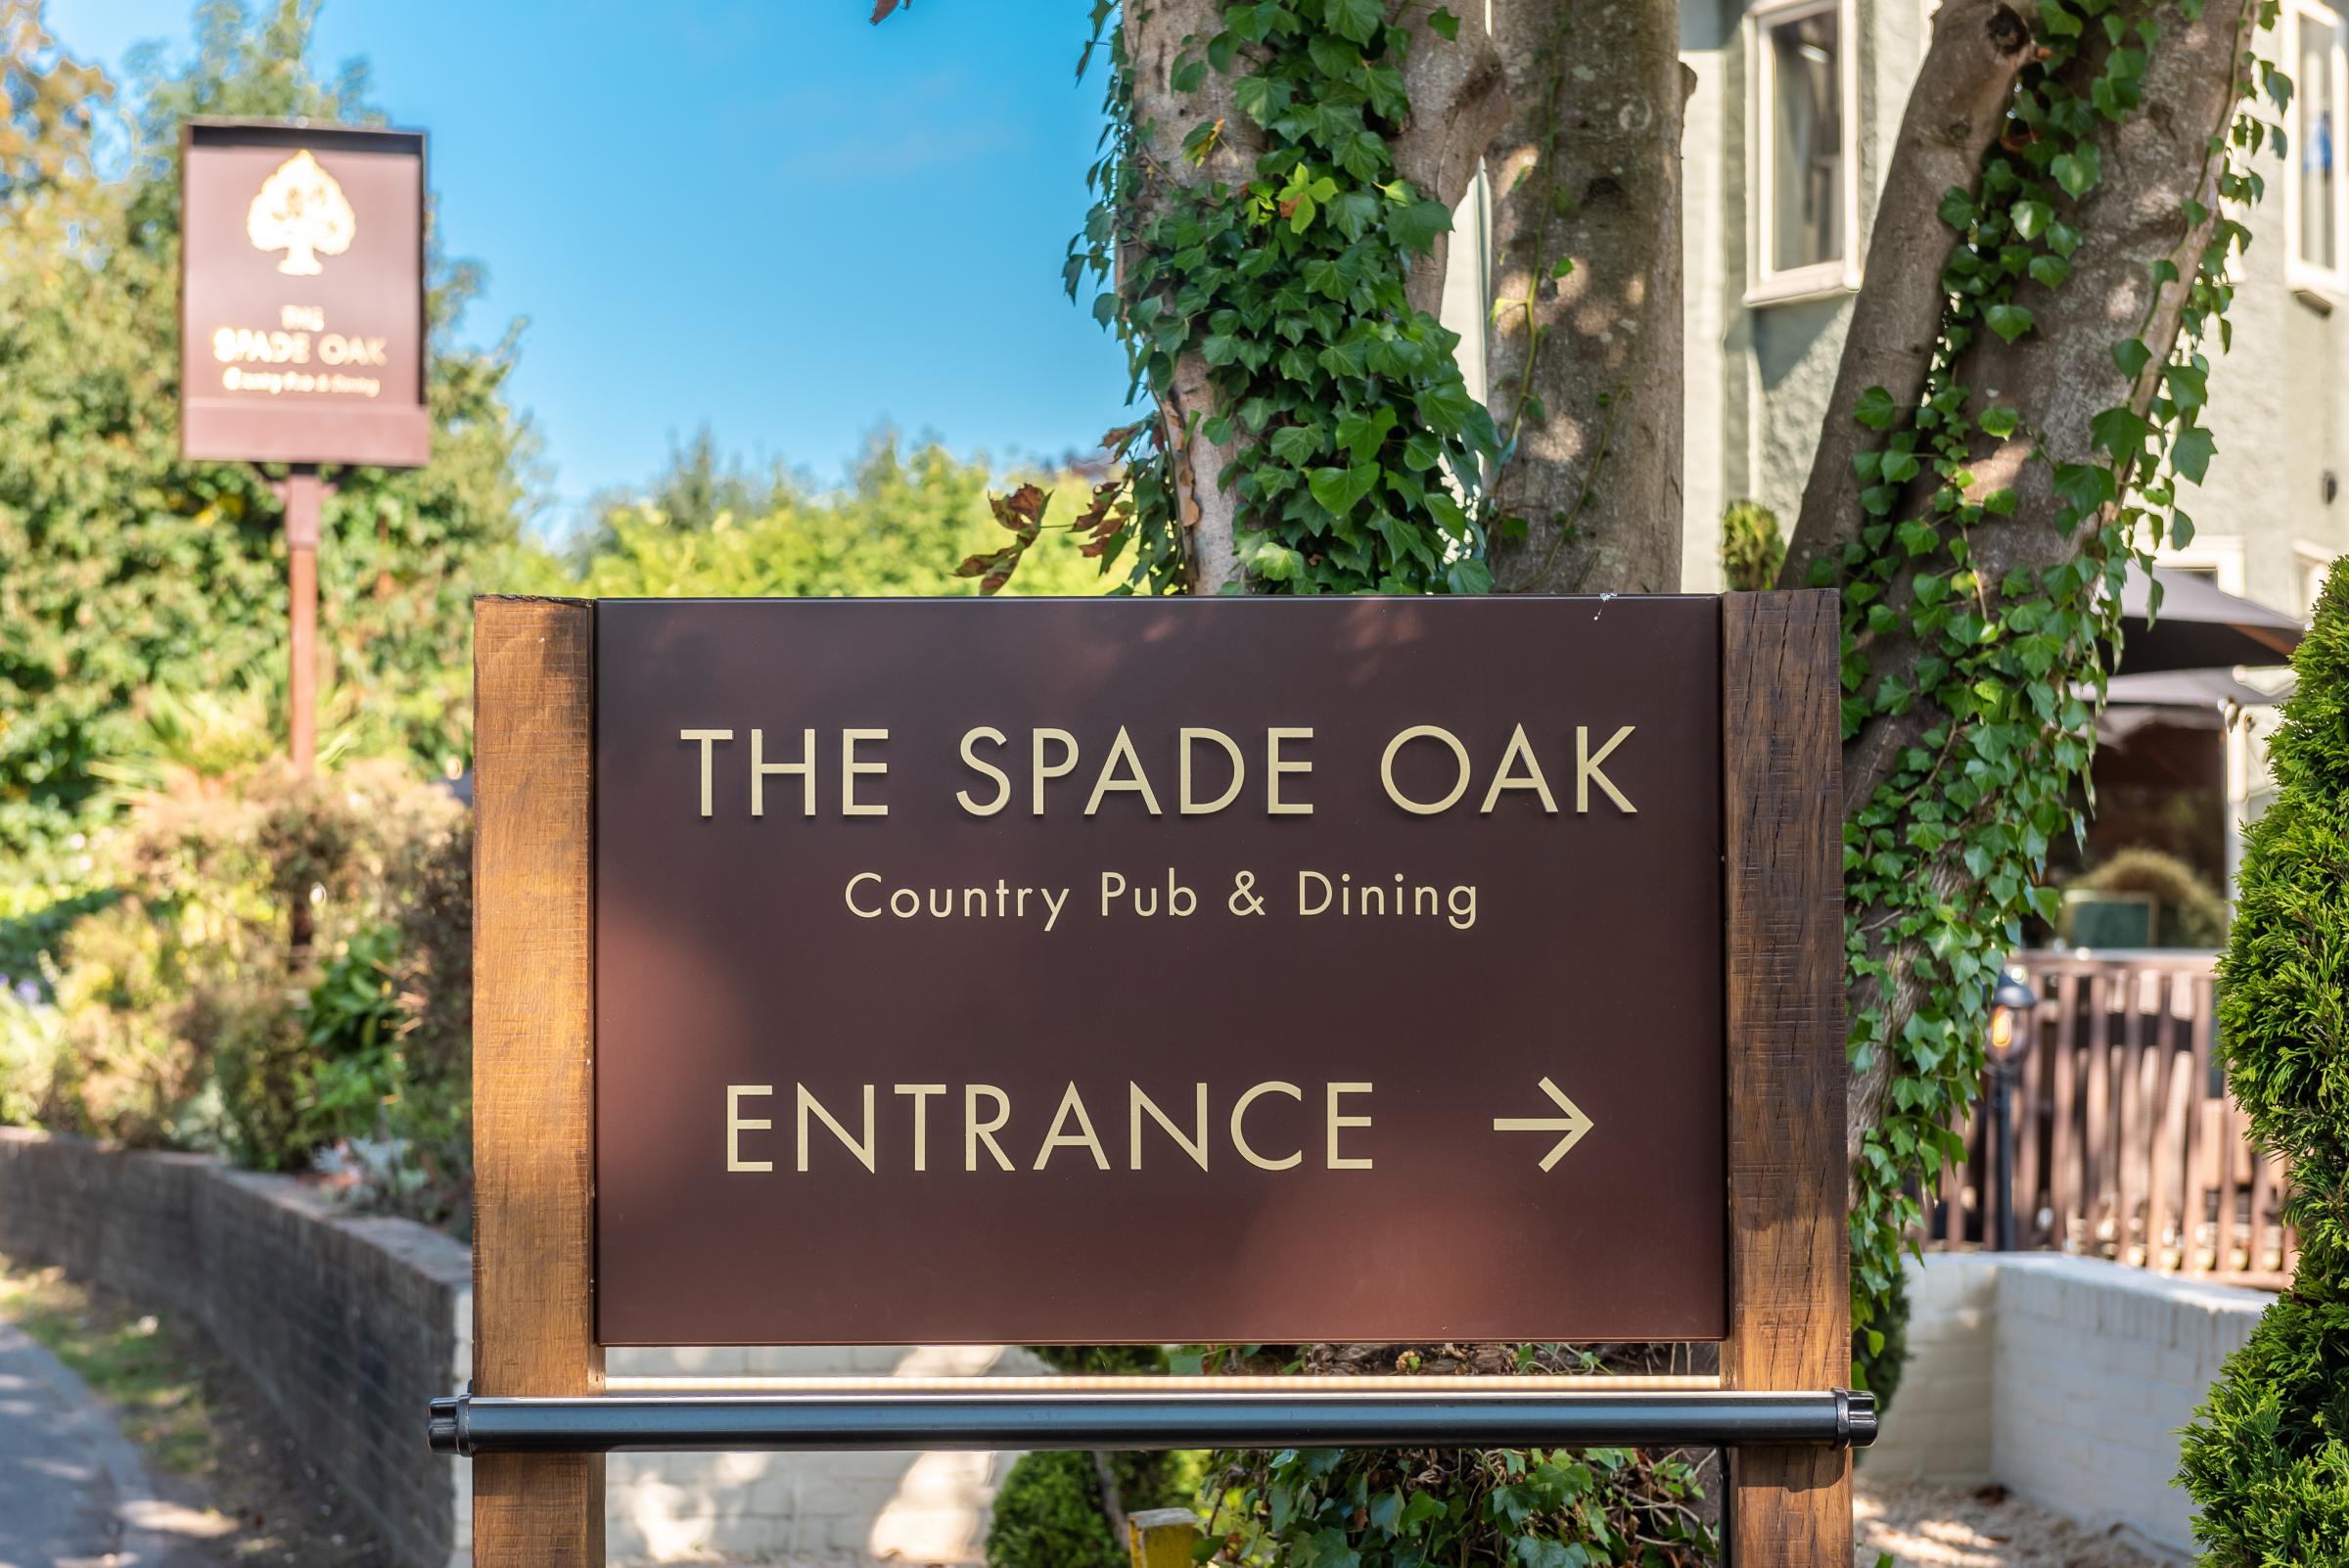 The Spade Oak has re-opened after a month closed due to a refurbishment